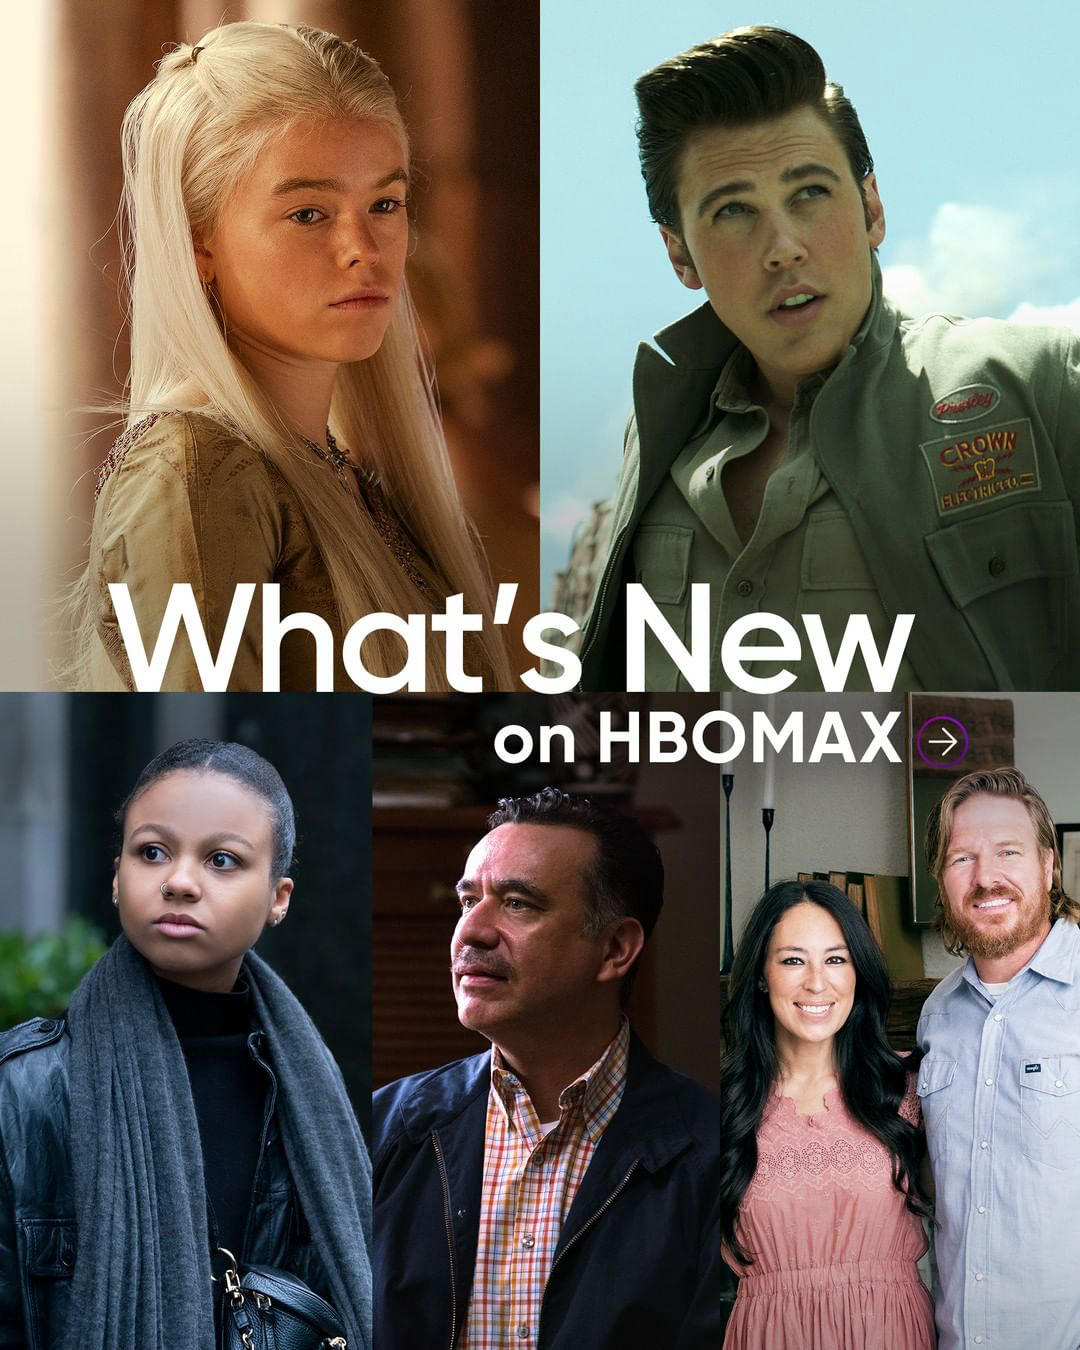 HBO Max - Back to your regularly scheduled streaming